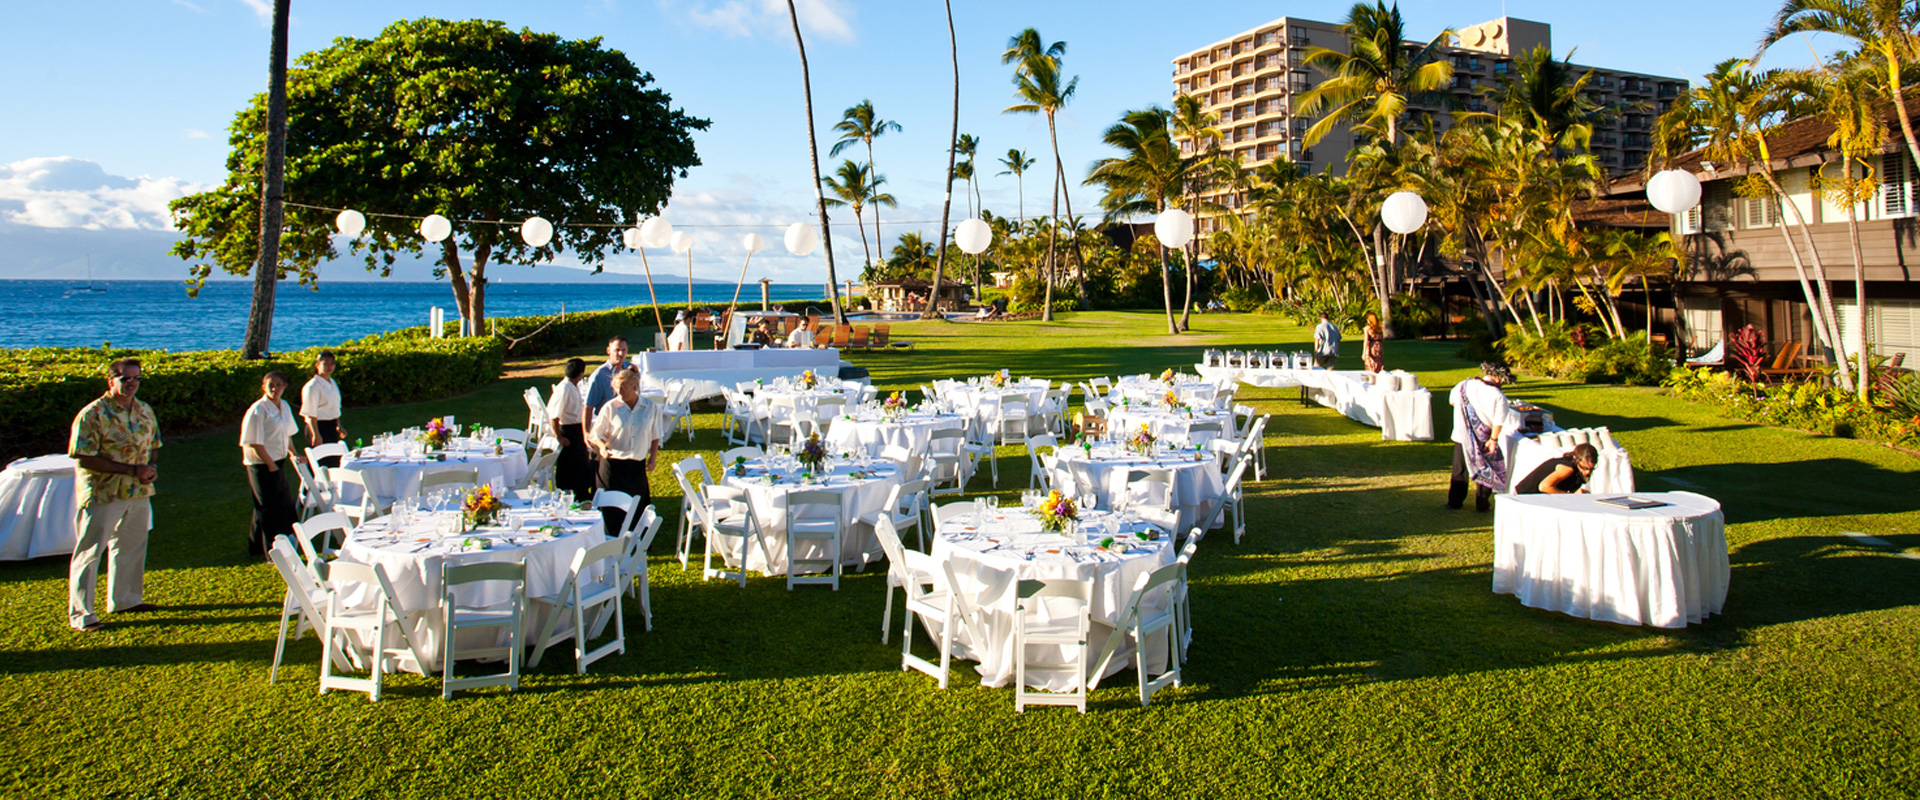 tables set up on the lawn for a reception